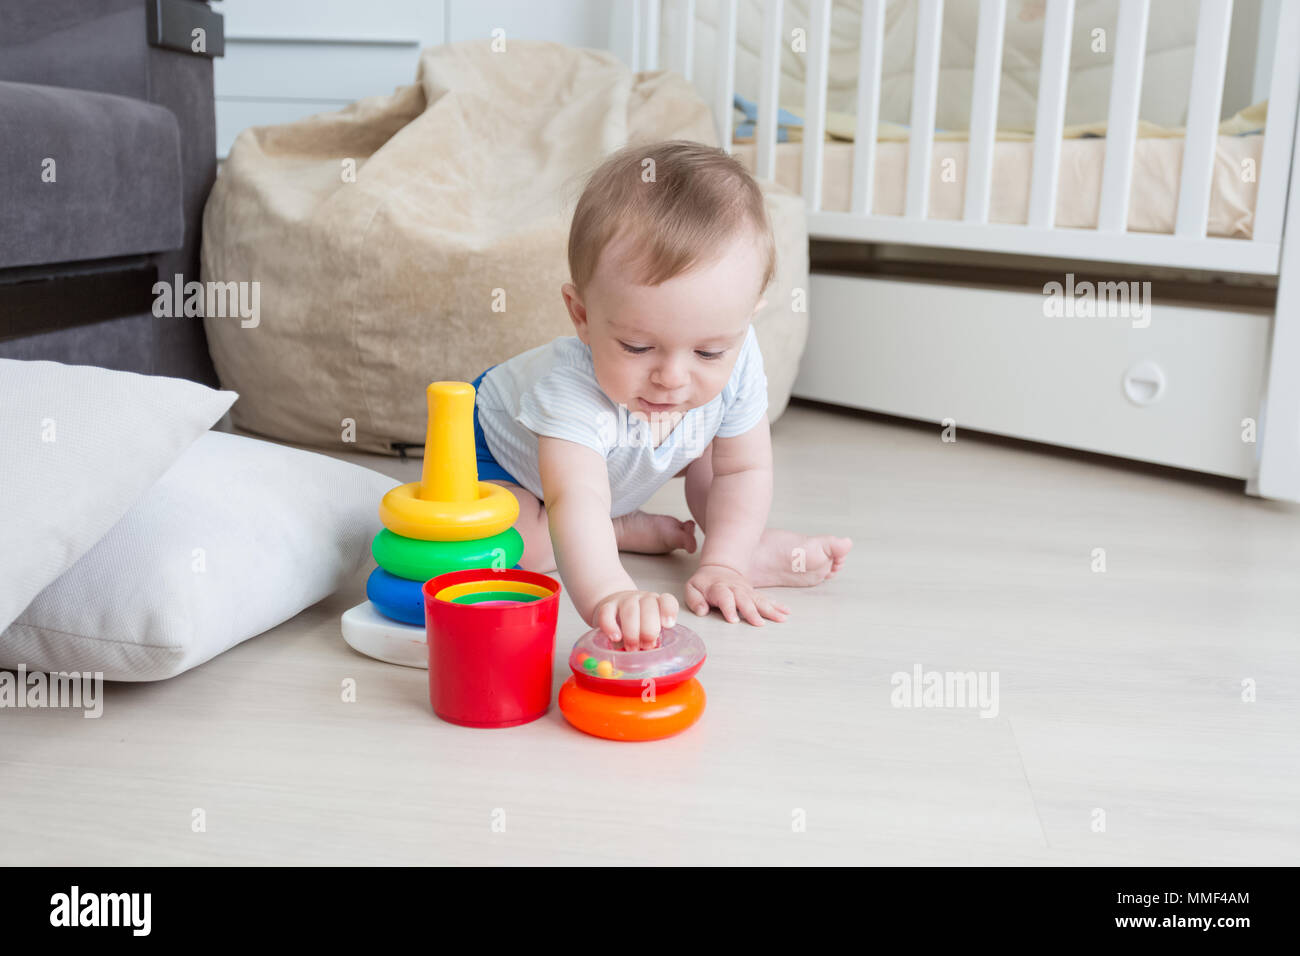 Adorable 10 months old toddler boy p laying in educaitonal games on floor Stock Photo